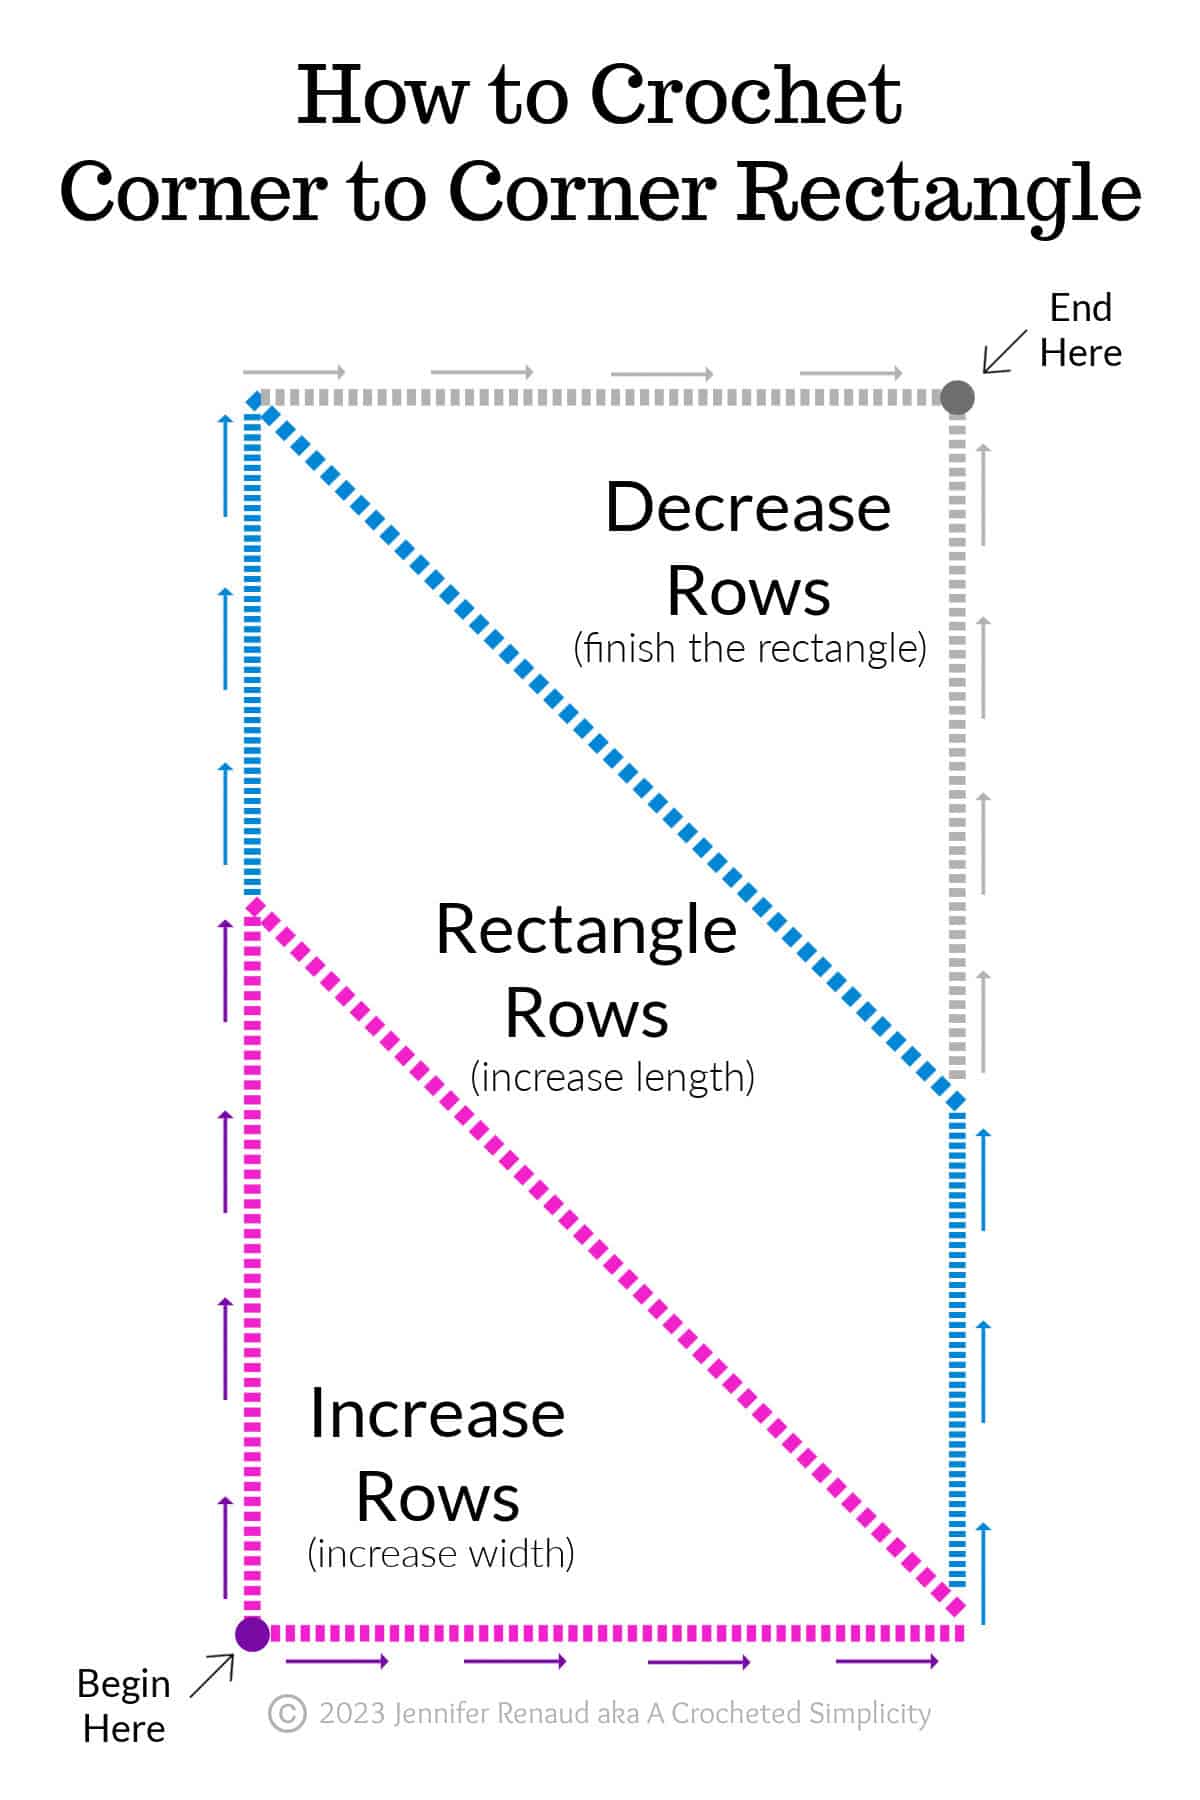 A chart showing how a corner to corner rectangle is worked.